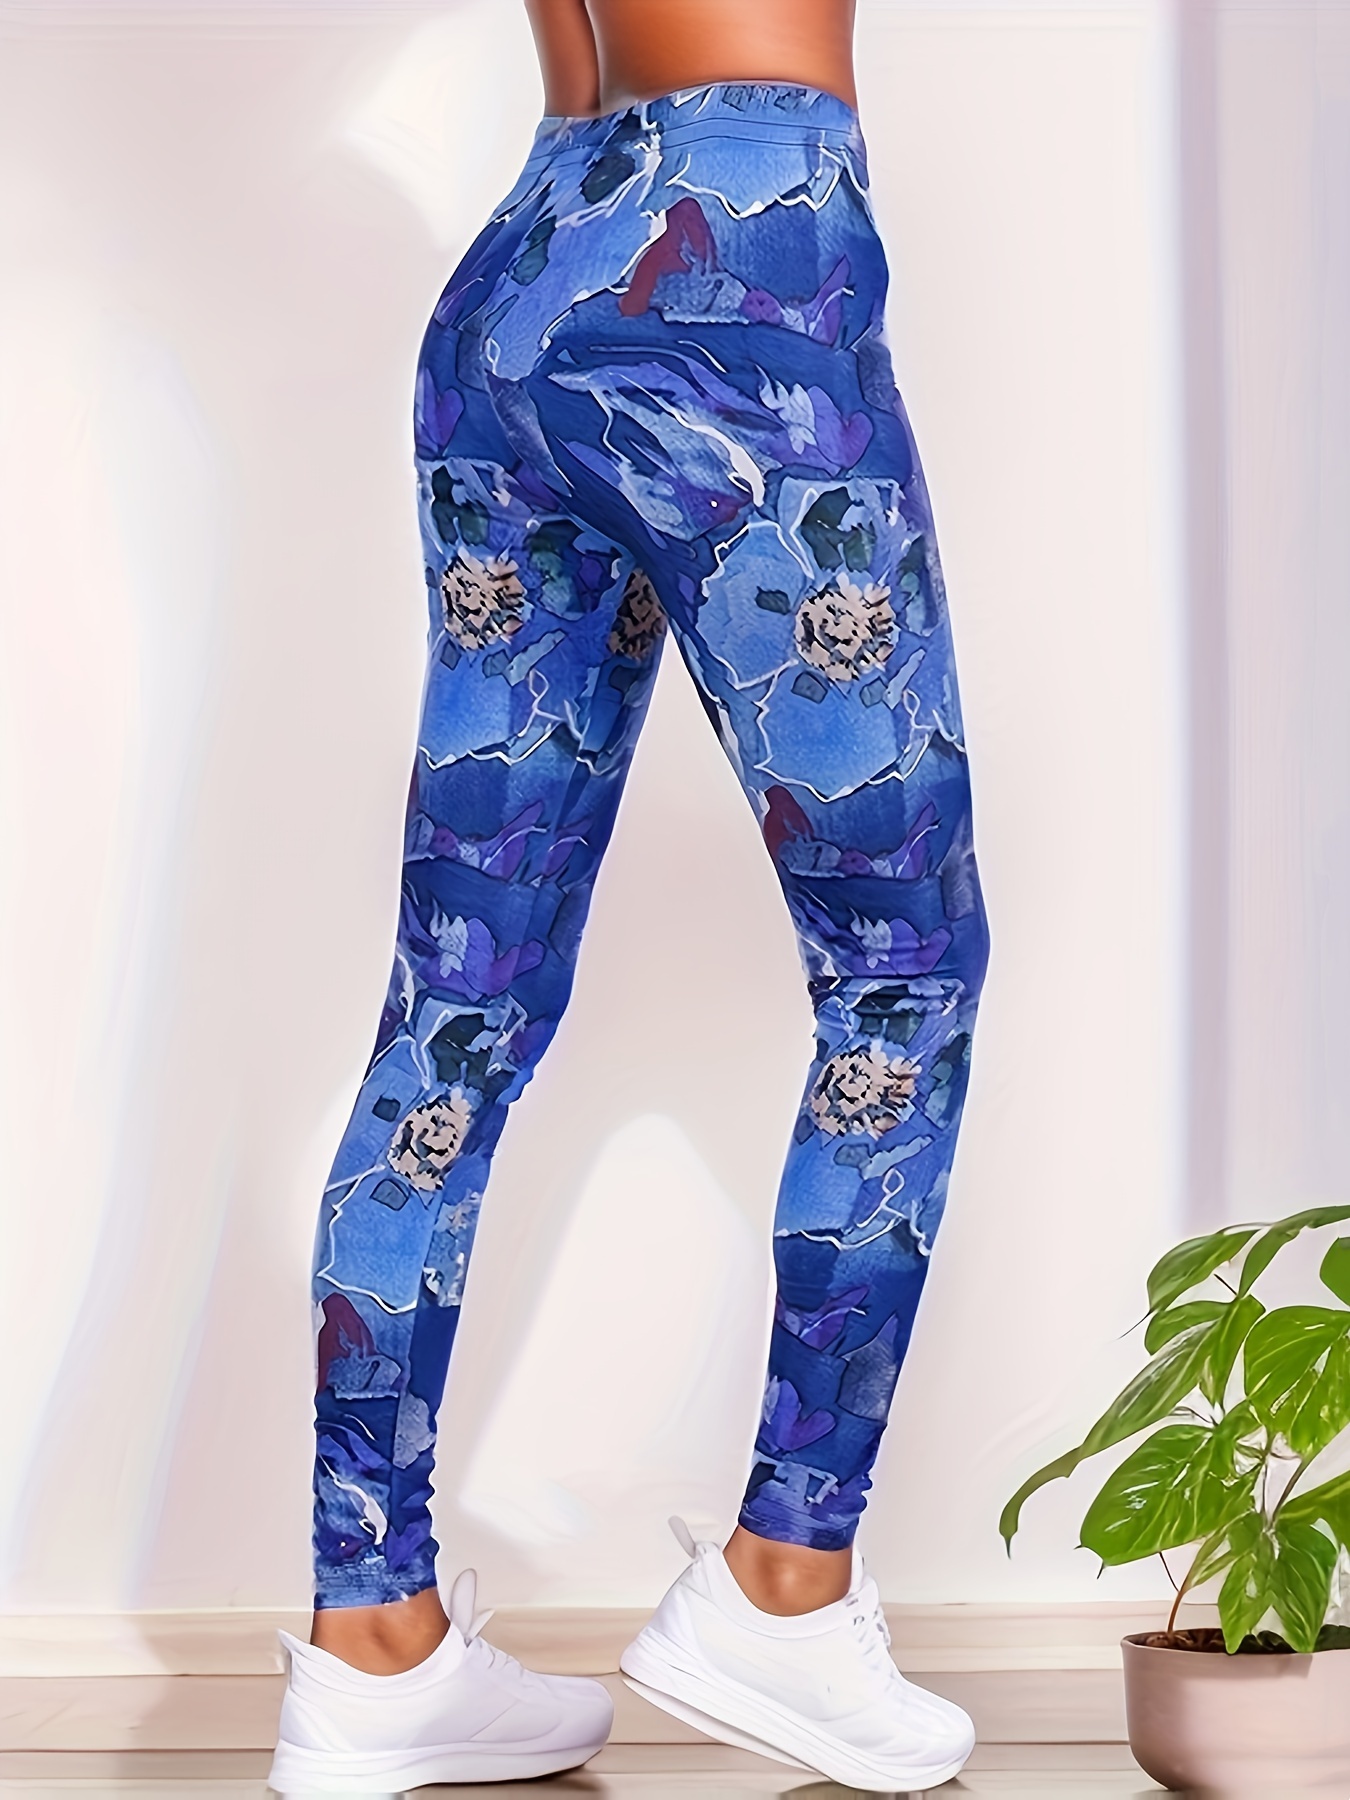 Paisley Printed Pattern High Waist And Hip Lifting Yoga Pants For Exercise  Fitness Training, High Stretch Sports Leggings, Women's Activewear